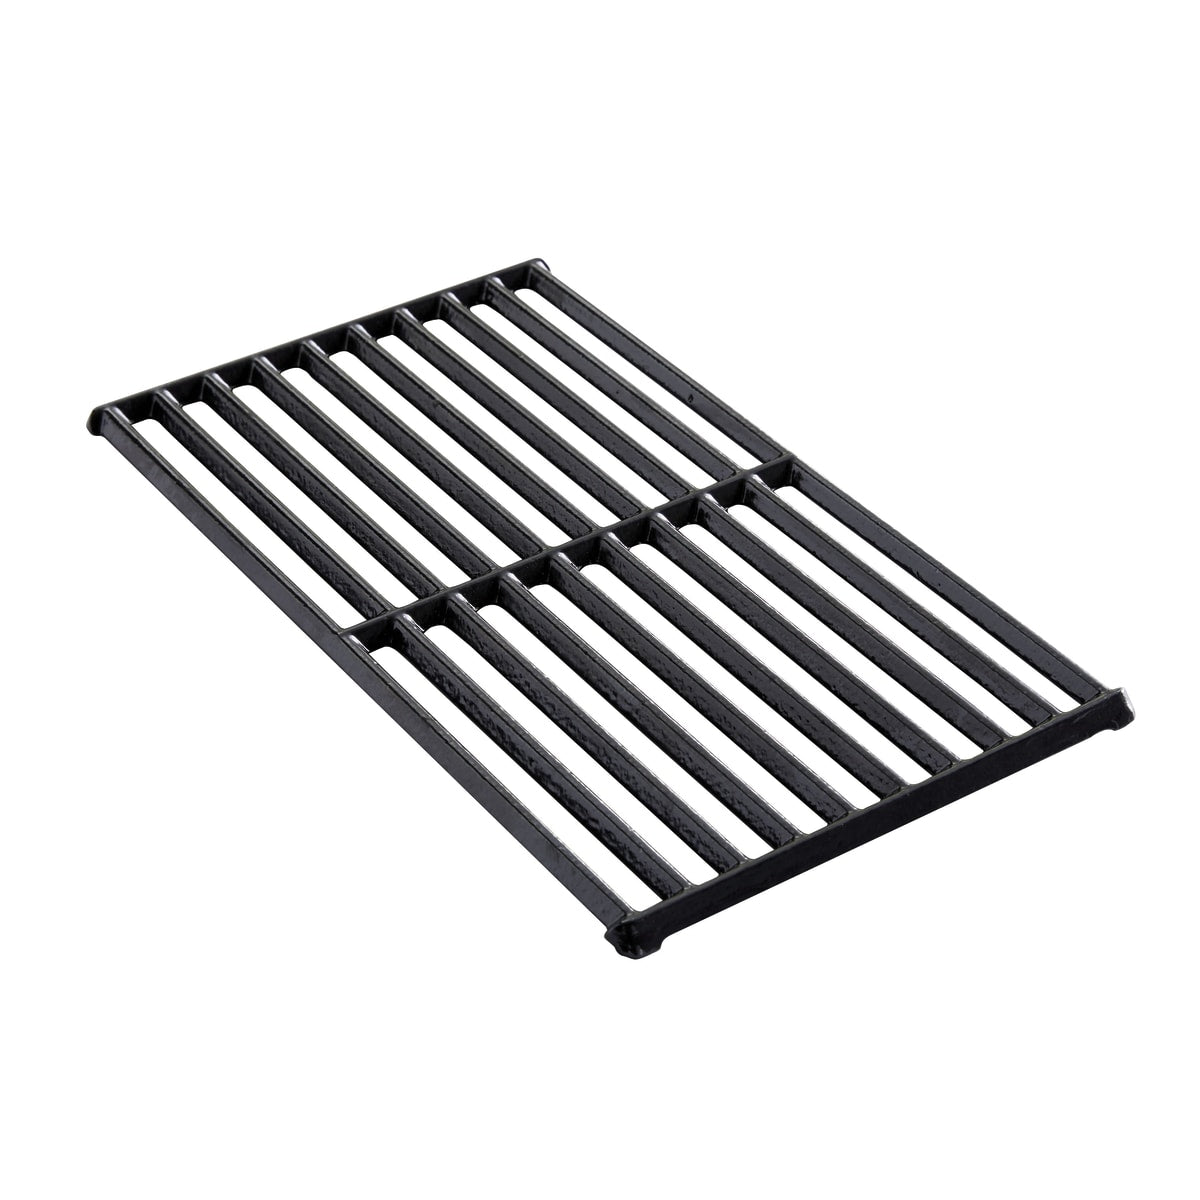 CAST IRON GRILL 41.5X24 FOR HUDSON GAS BBQ